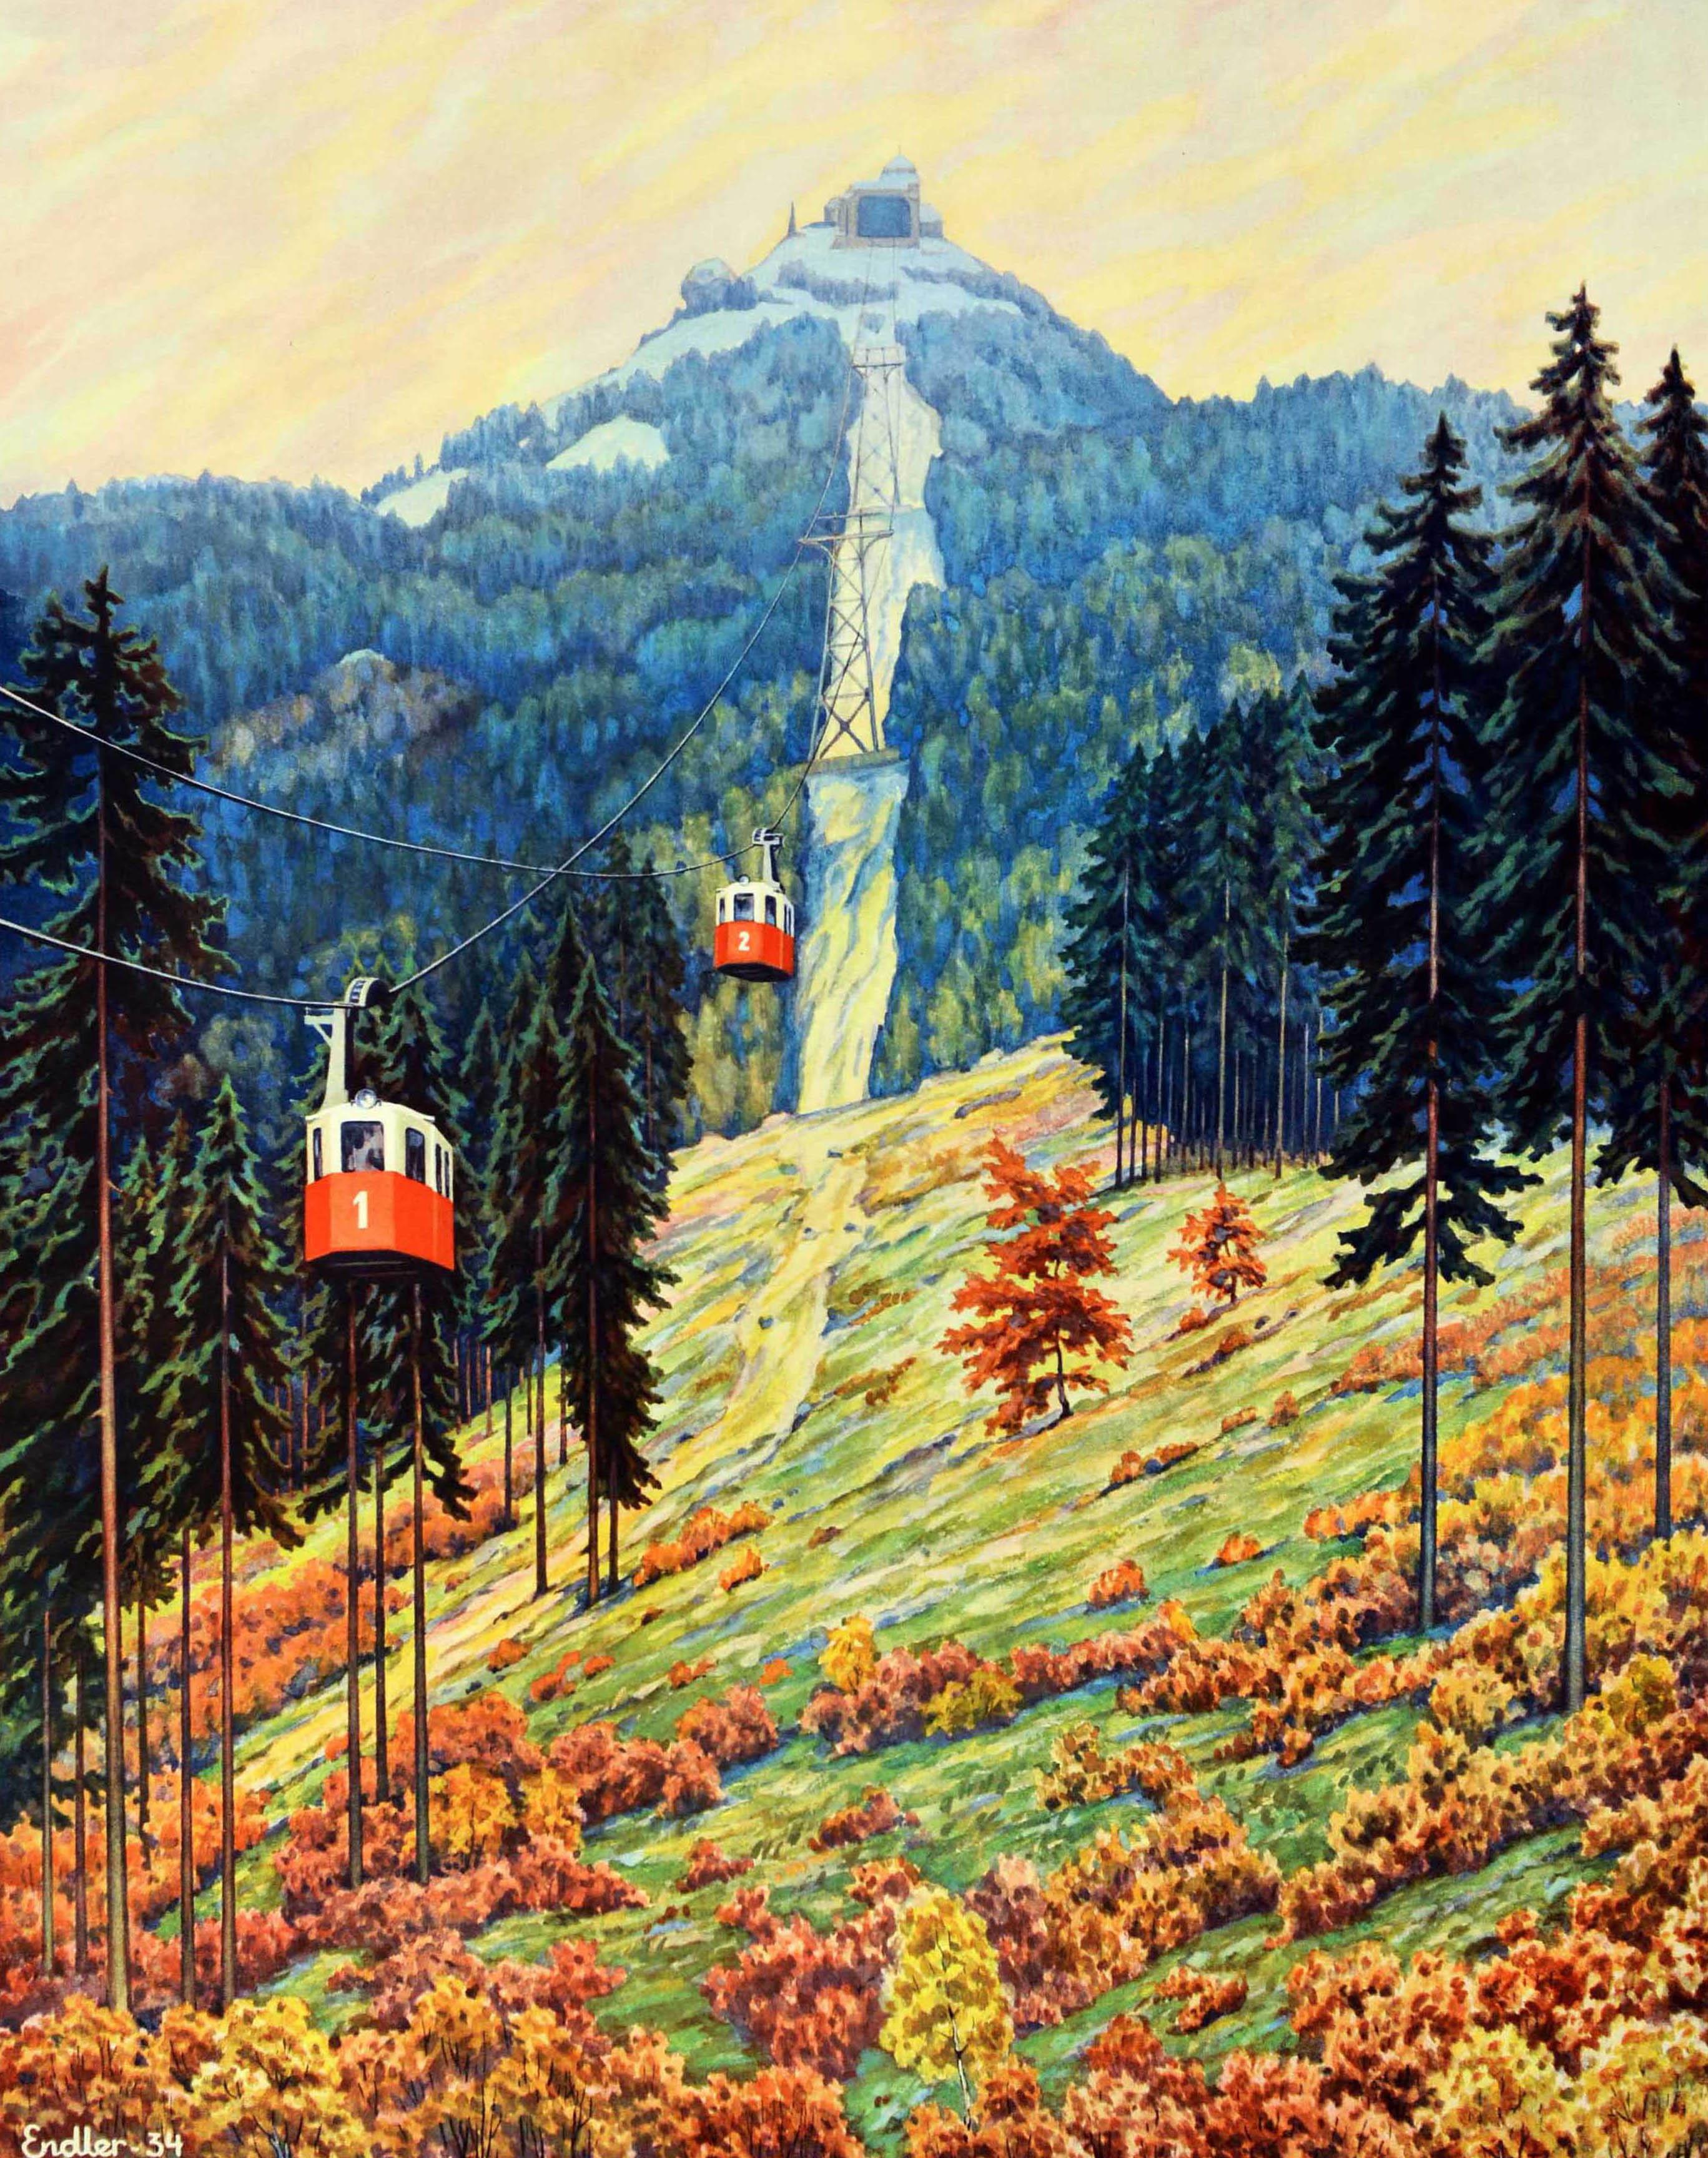 Original vintage travel poster advertising the CSD Ceskoslovenske Statni Drahy Czechoslovak State Railways featuring stunning scenic artwork depicting a cable car on a mountain with trees on both sides of the cabins, the title text and information